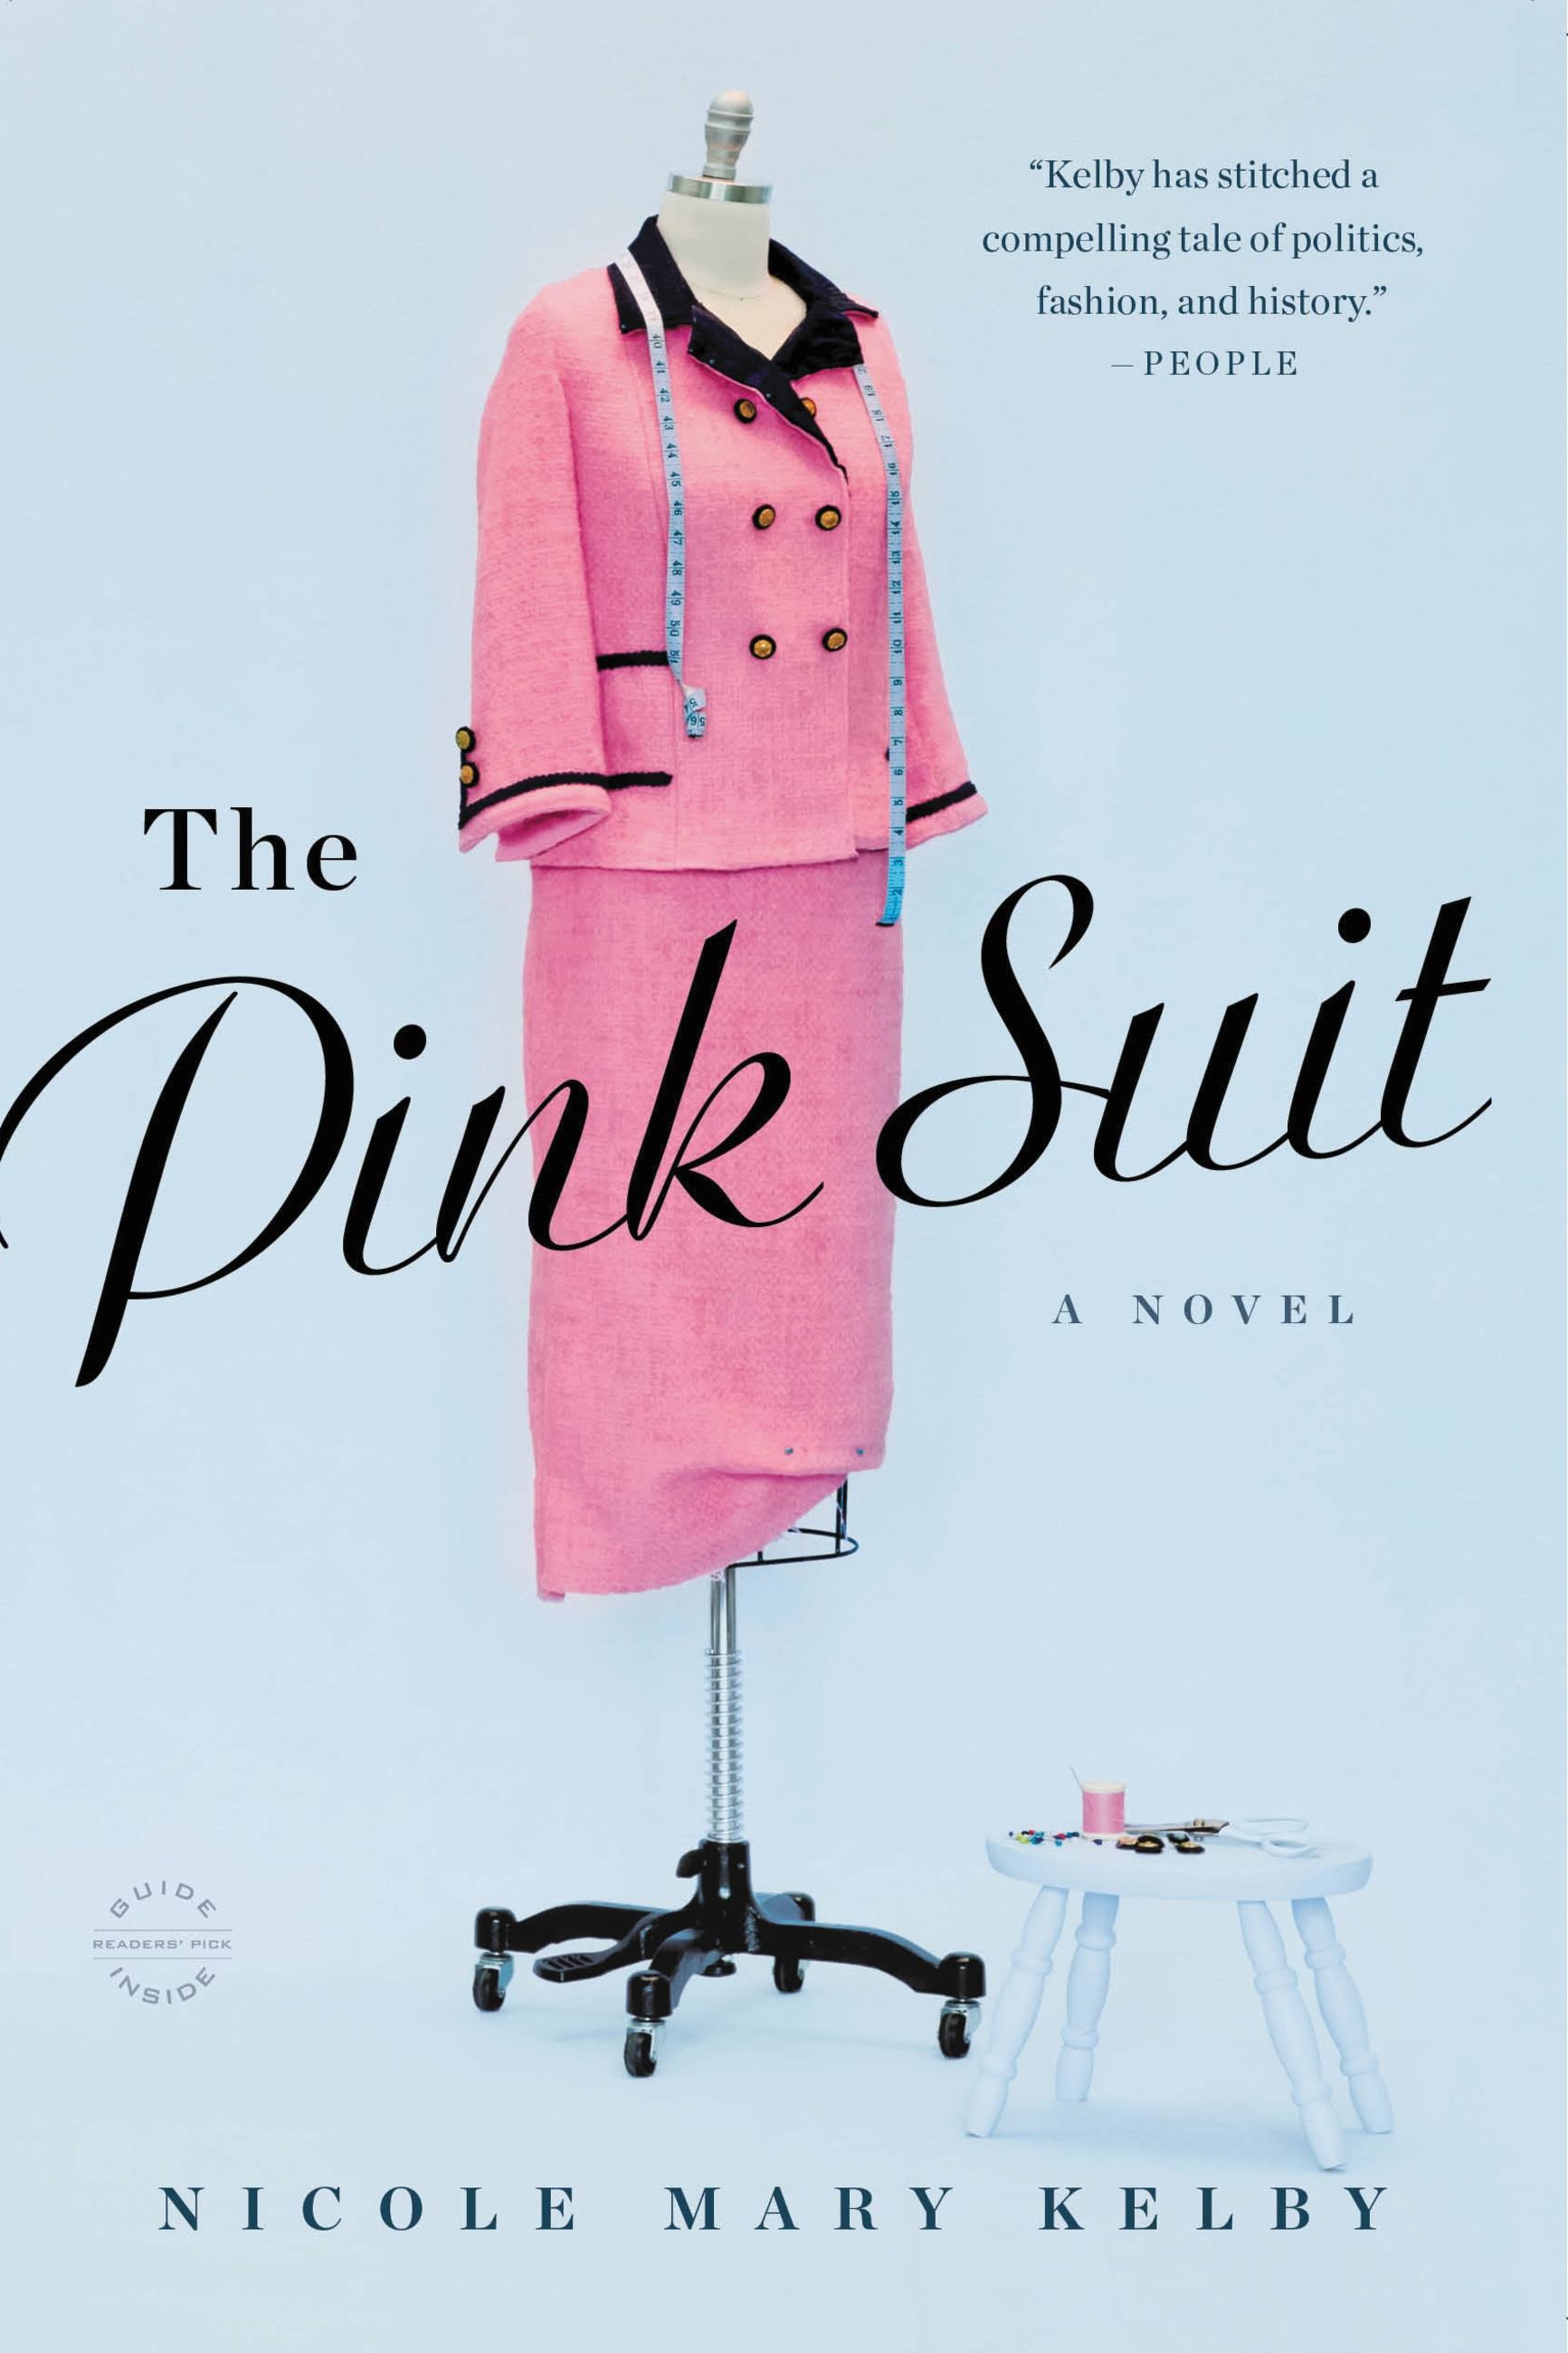 The secrets of Jackie's iconic pink Chanel suit